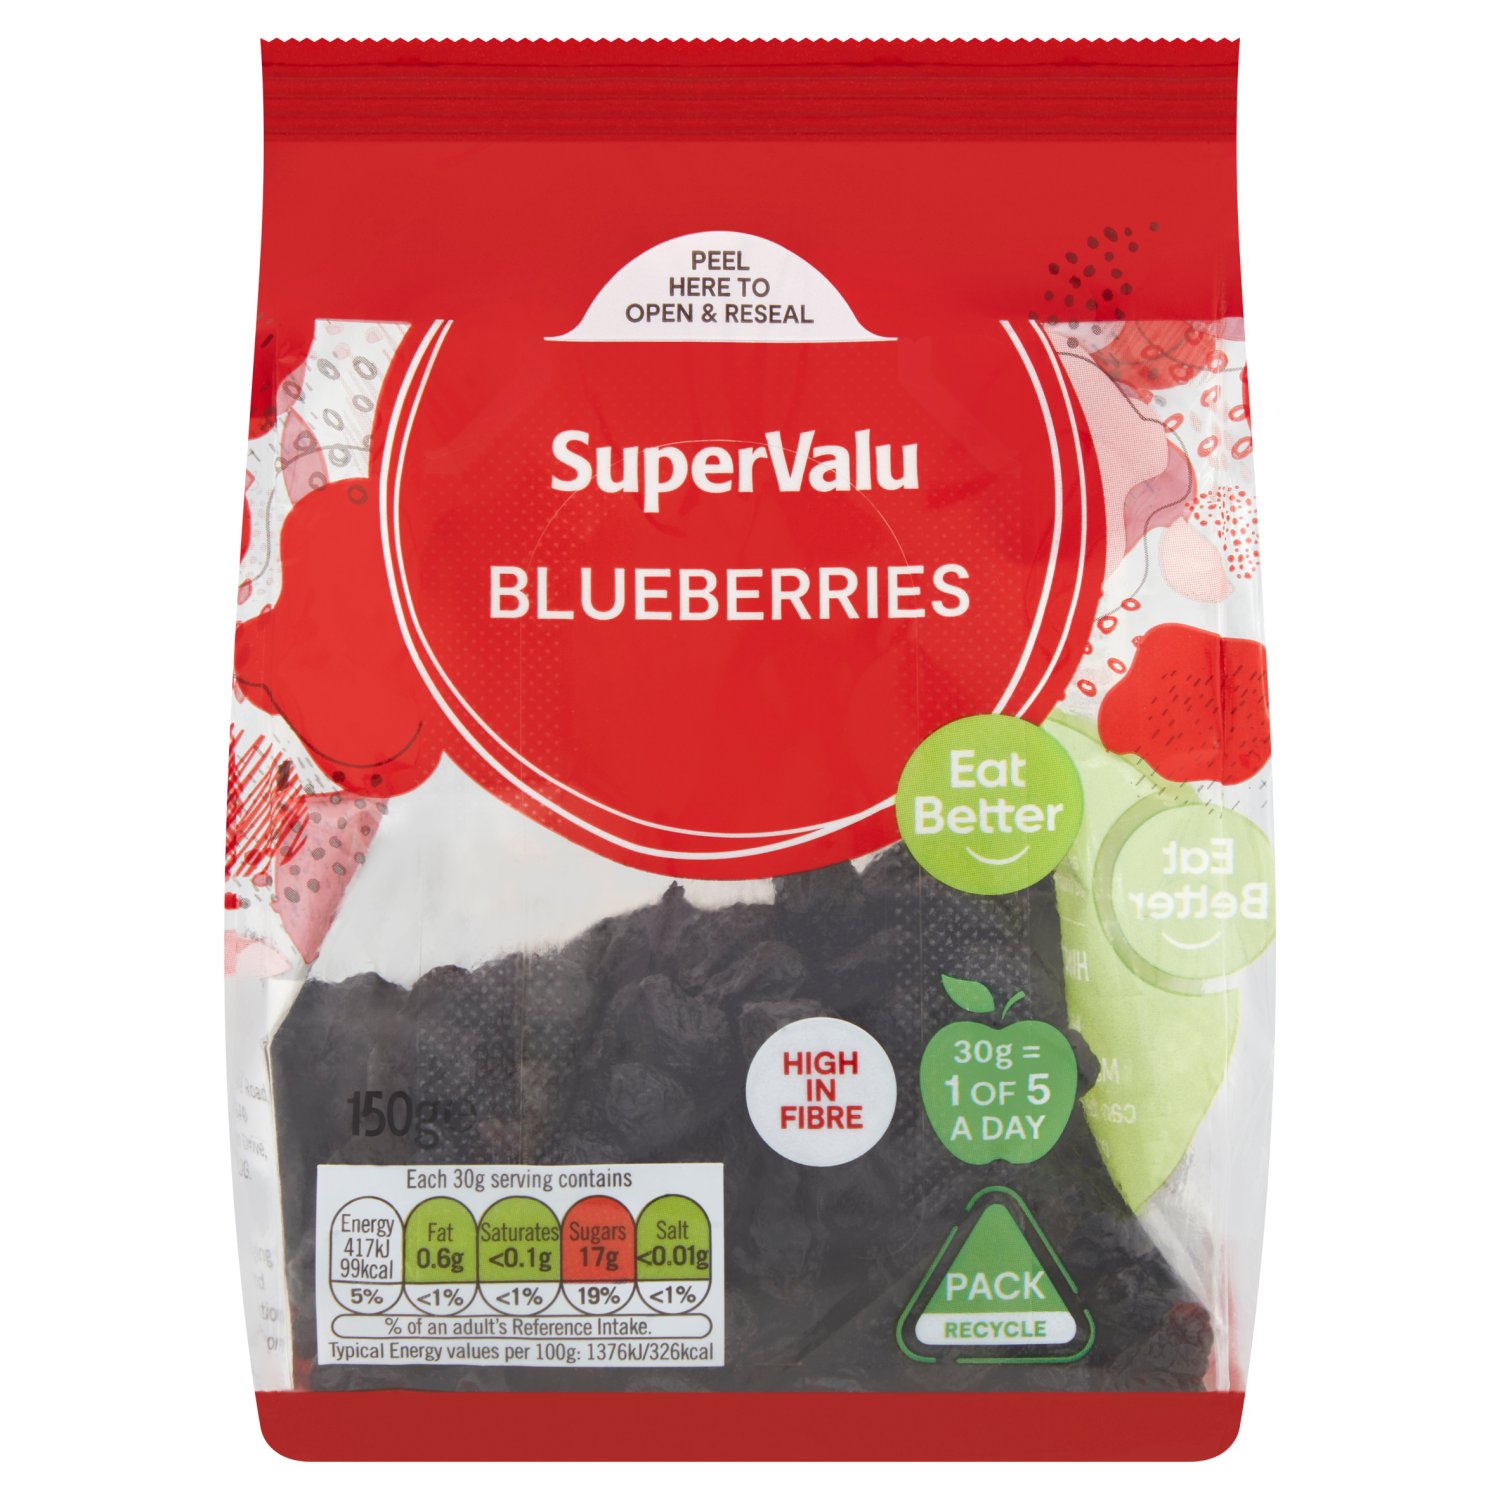 1 of 5 a Day*: It is recommended that we eat at least 5 portions of fruit and vegetables every day.
*30g of dried blueberries equals one of your five a day.